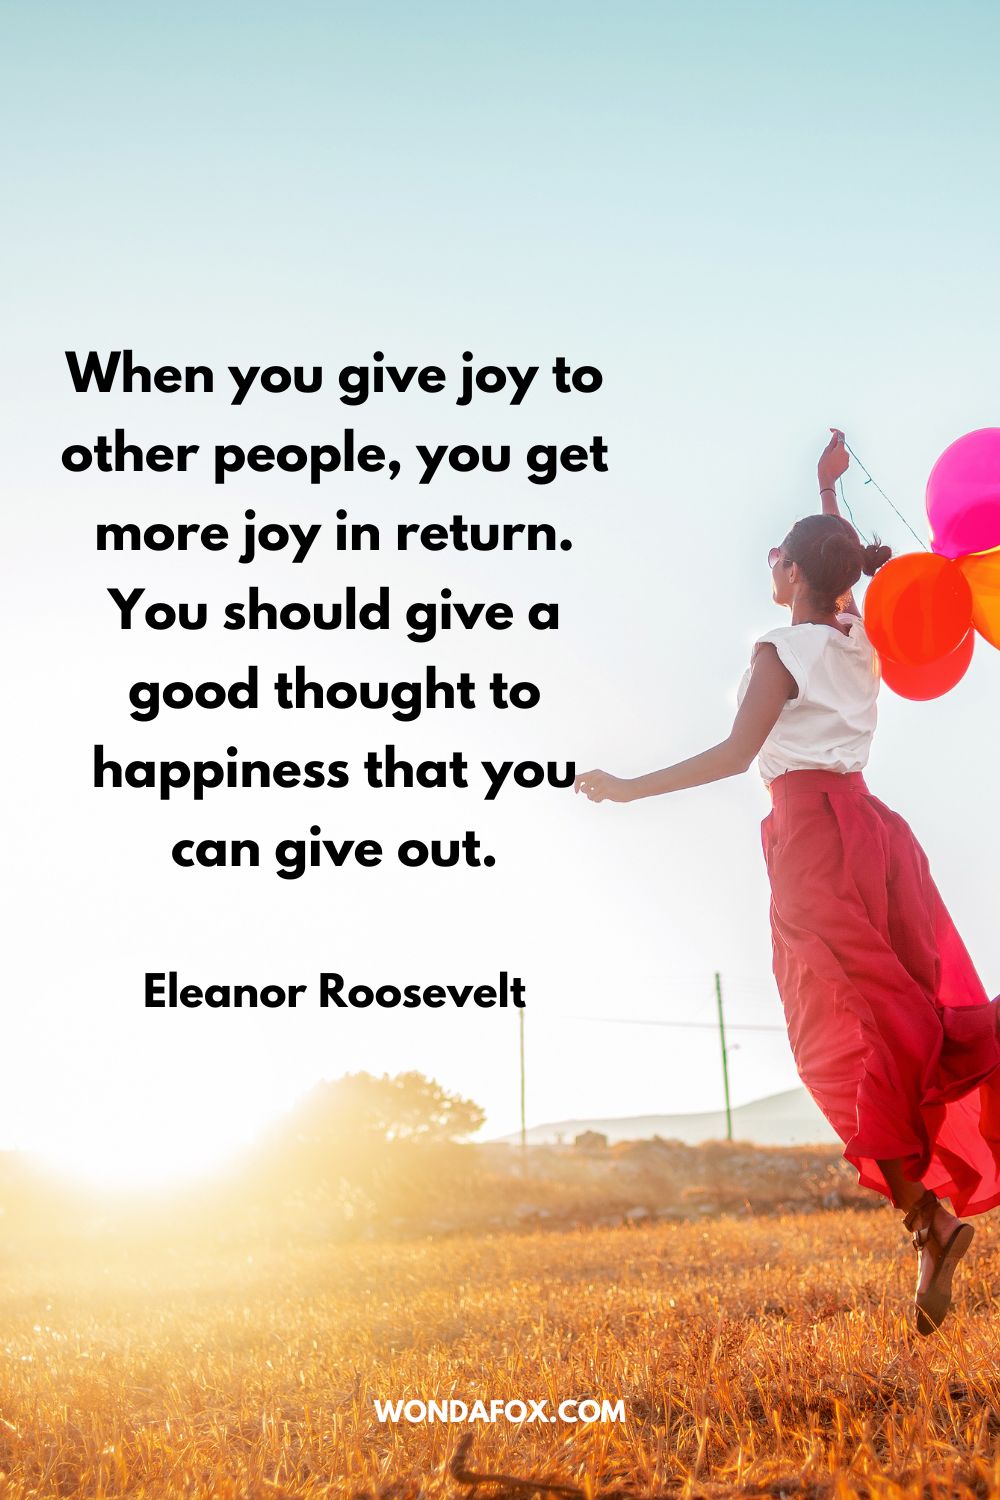 When you give joy to other people, you get more joy in return. You should give a good thought to happiness that you can give out. Eleanor Roosevelt